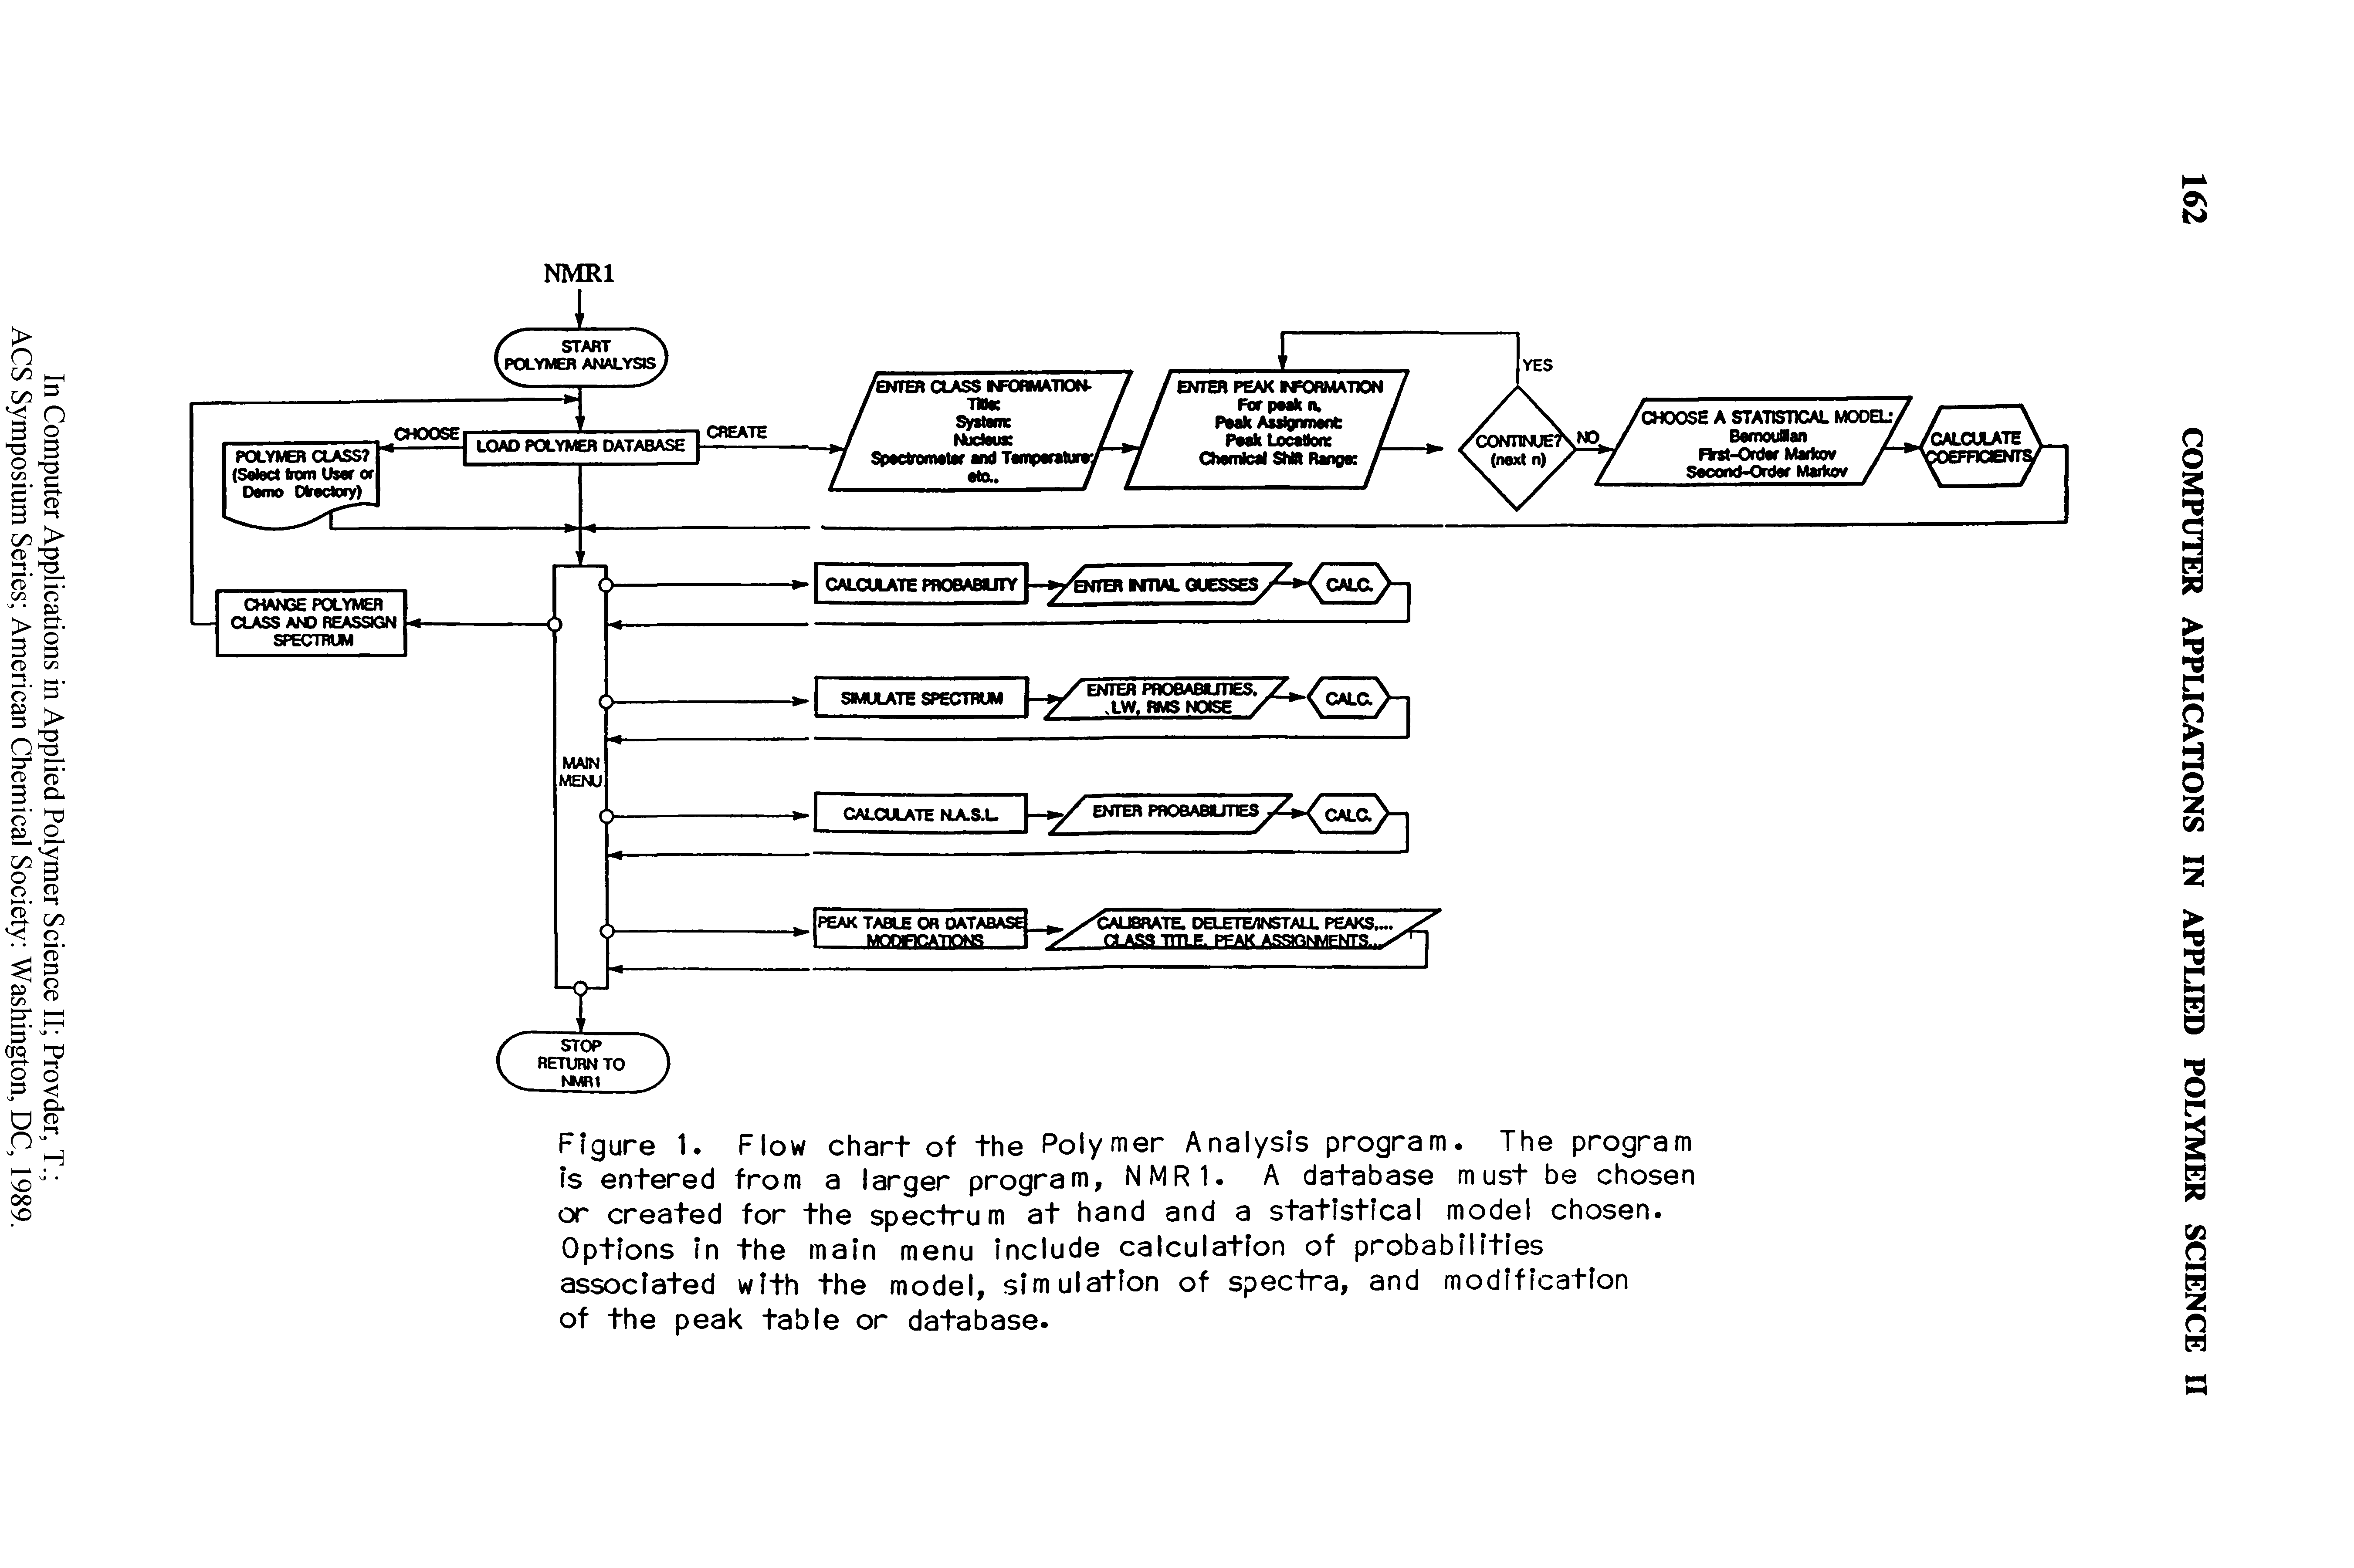 Figure 1. Flow chart of the Polymer Analysis program. The program Is entered from a larger program, NMRl. A database must be chosen or created for the spectrum at hand and a statistical model chosen. Options In the main menu Include calculation of probabilities associated with the model, simulation of spectra, and modification of the peak table or database.